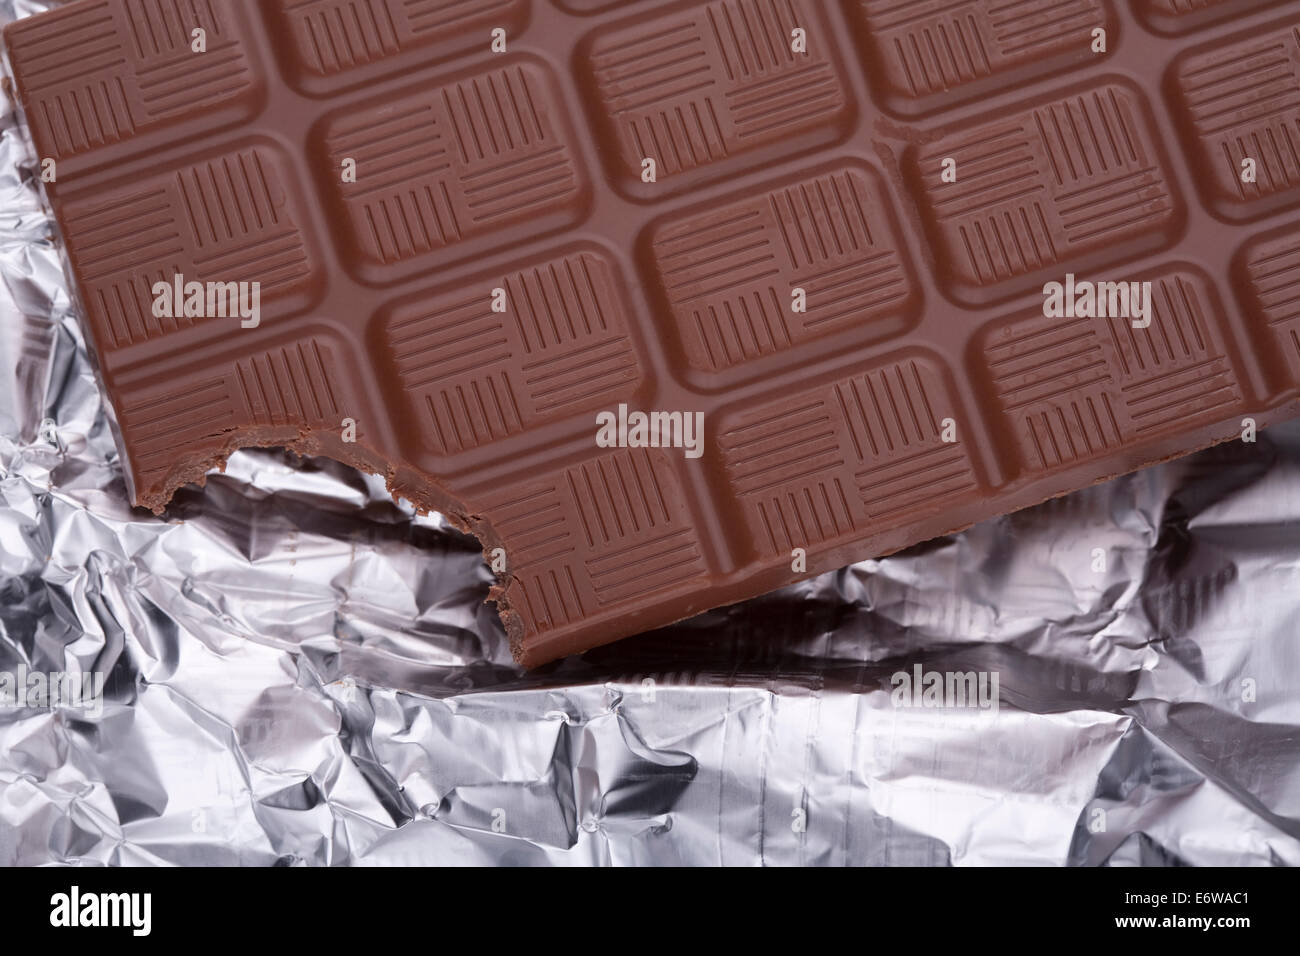 Bitten a piece of chocolate bar in silver foil packaging. Stock Photo